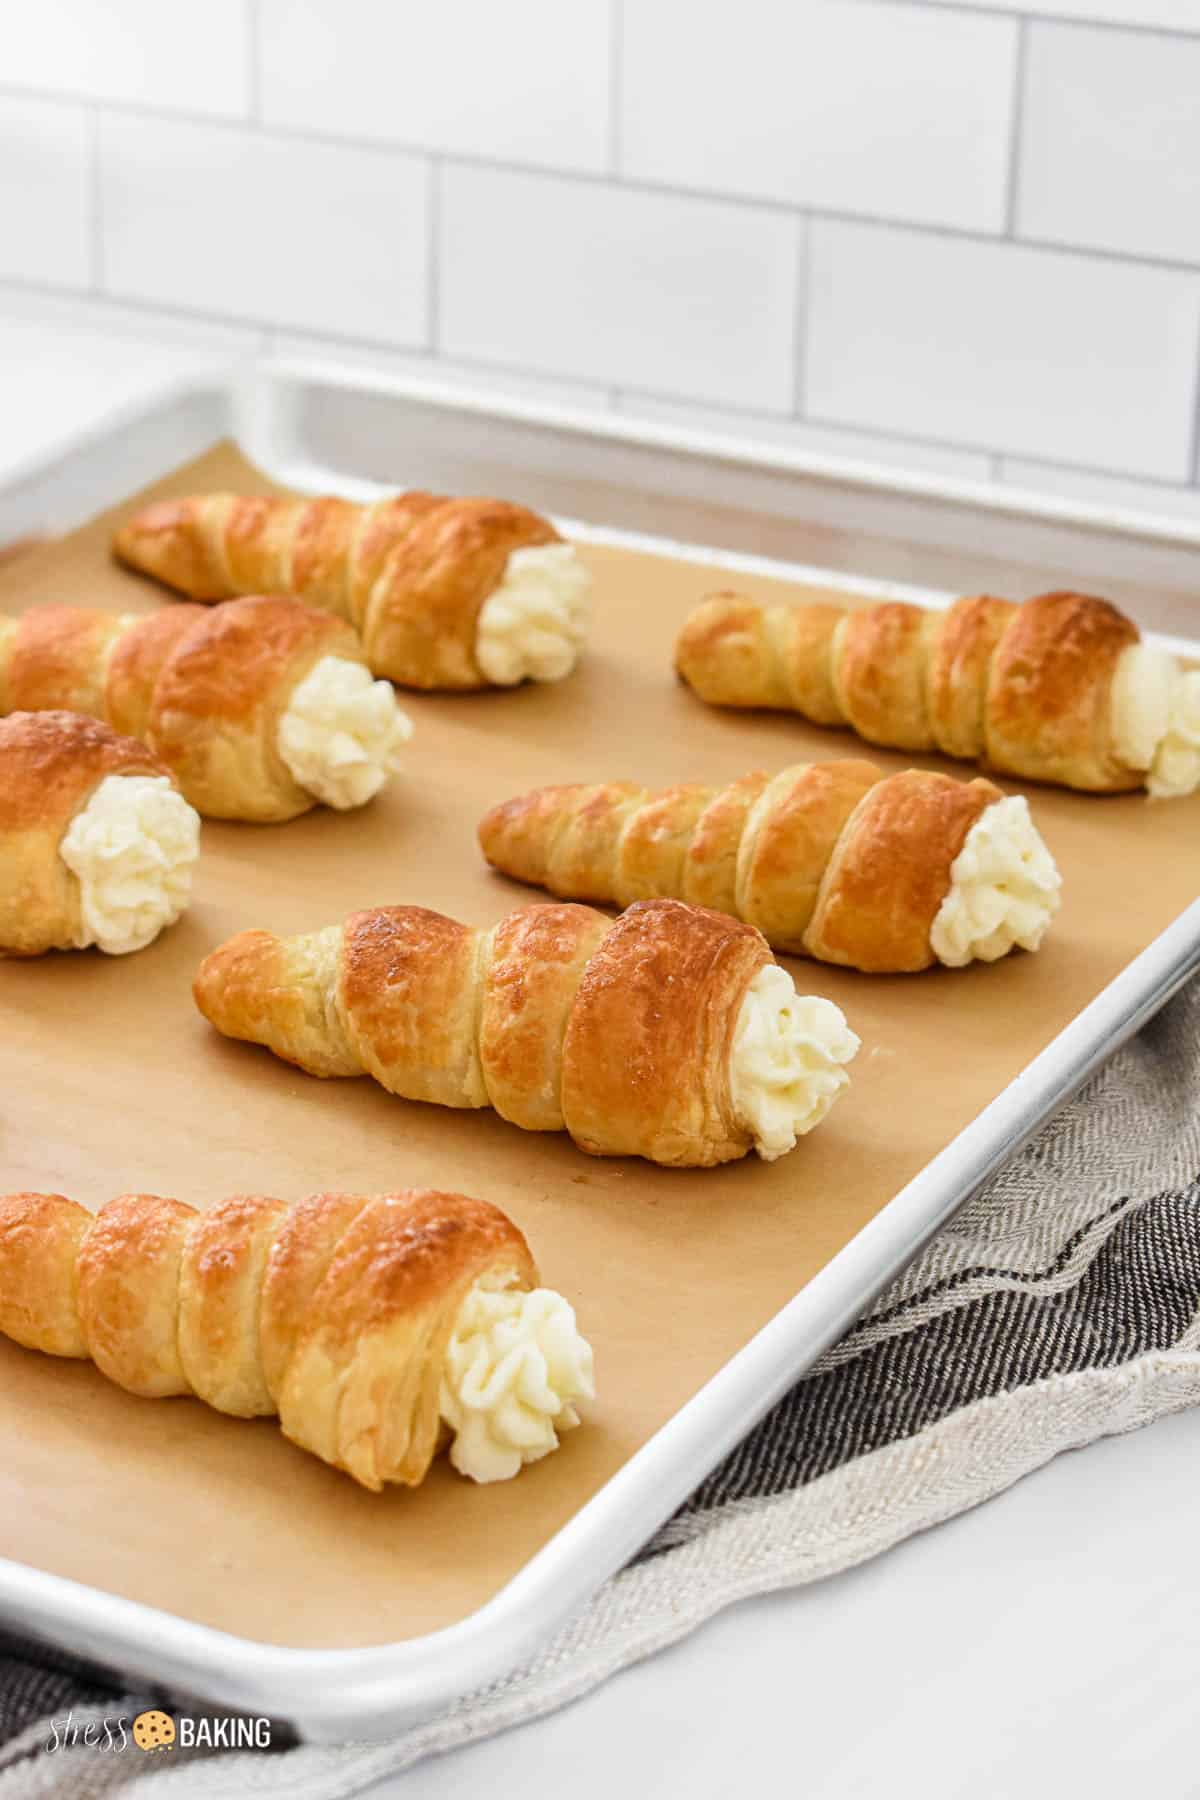 Pastry cones filled with cream on a baking sheet